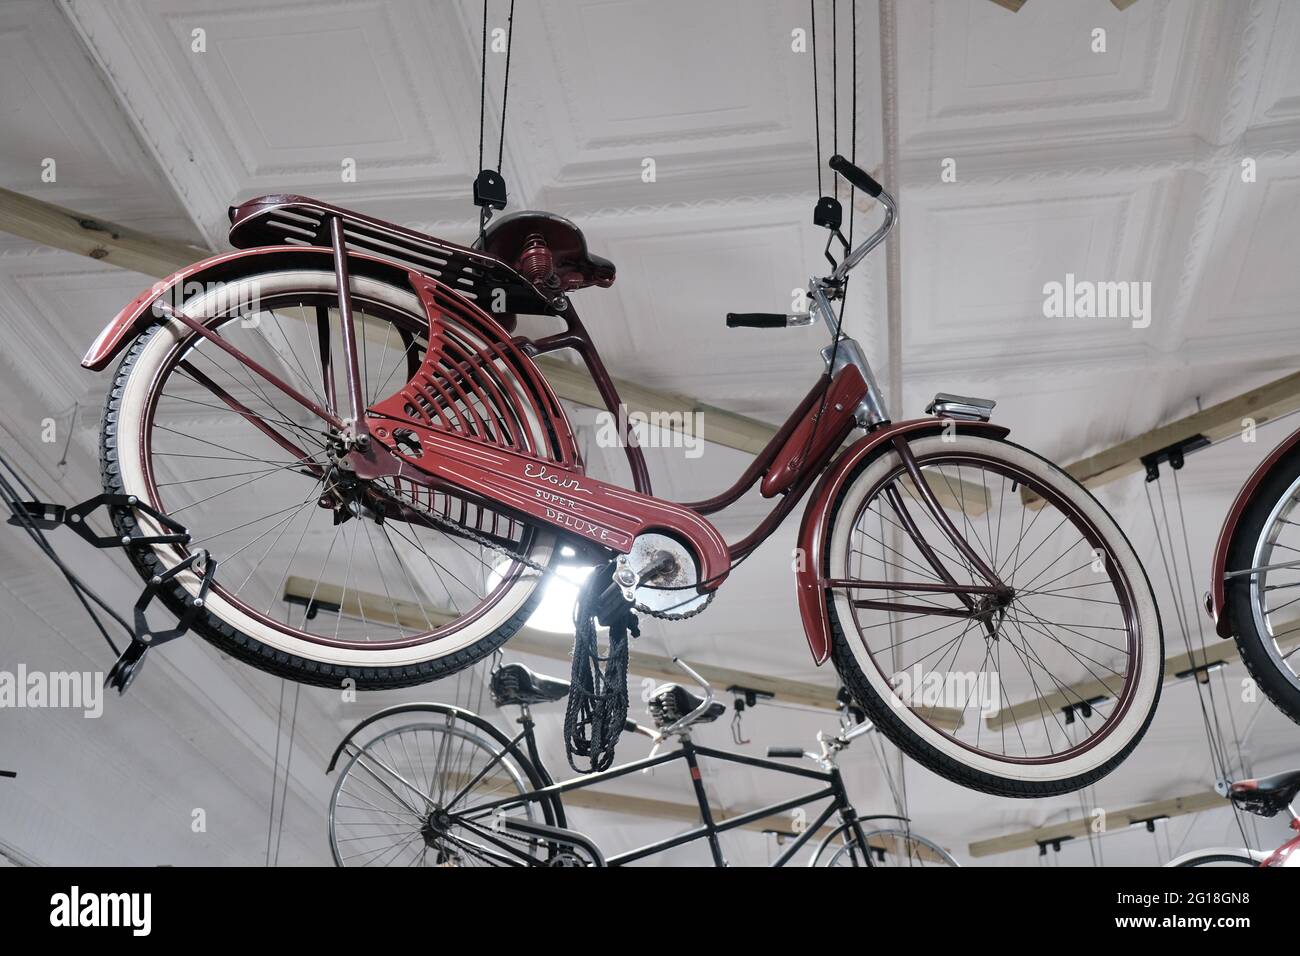 This is an antique lgin Special Deluxe Bicycle, this brand was sold by Sears before World War 2. Very old bicycle, pretty cool. I shot this in a bicyc Stock Photo